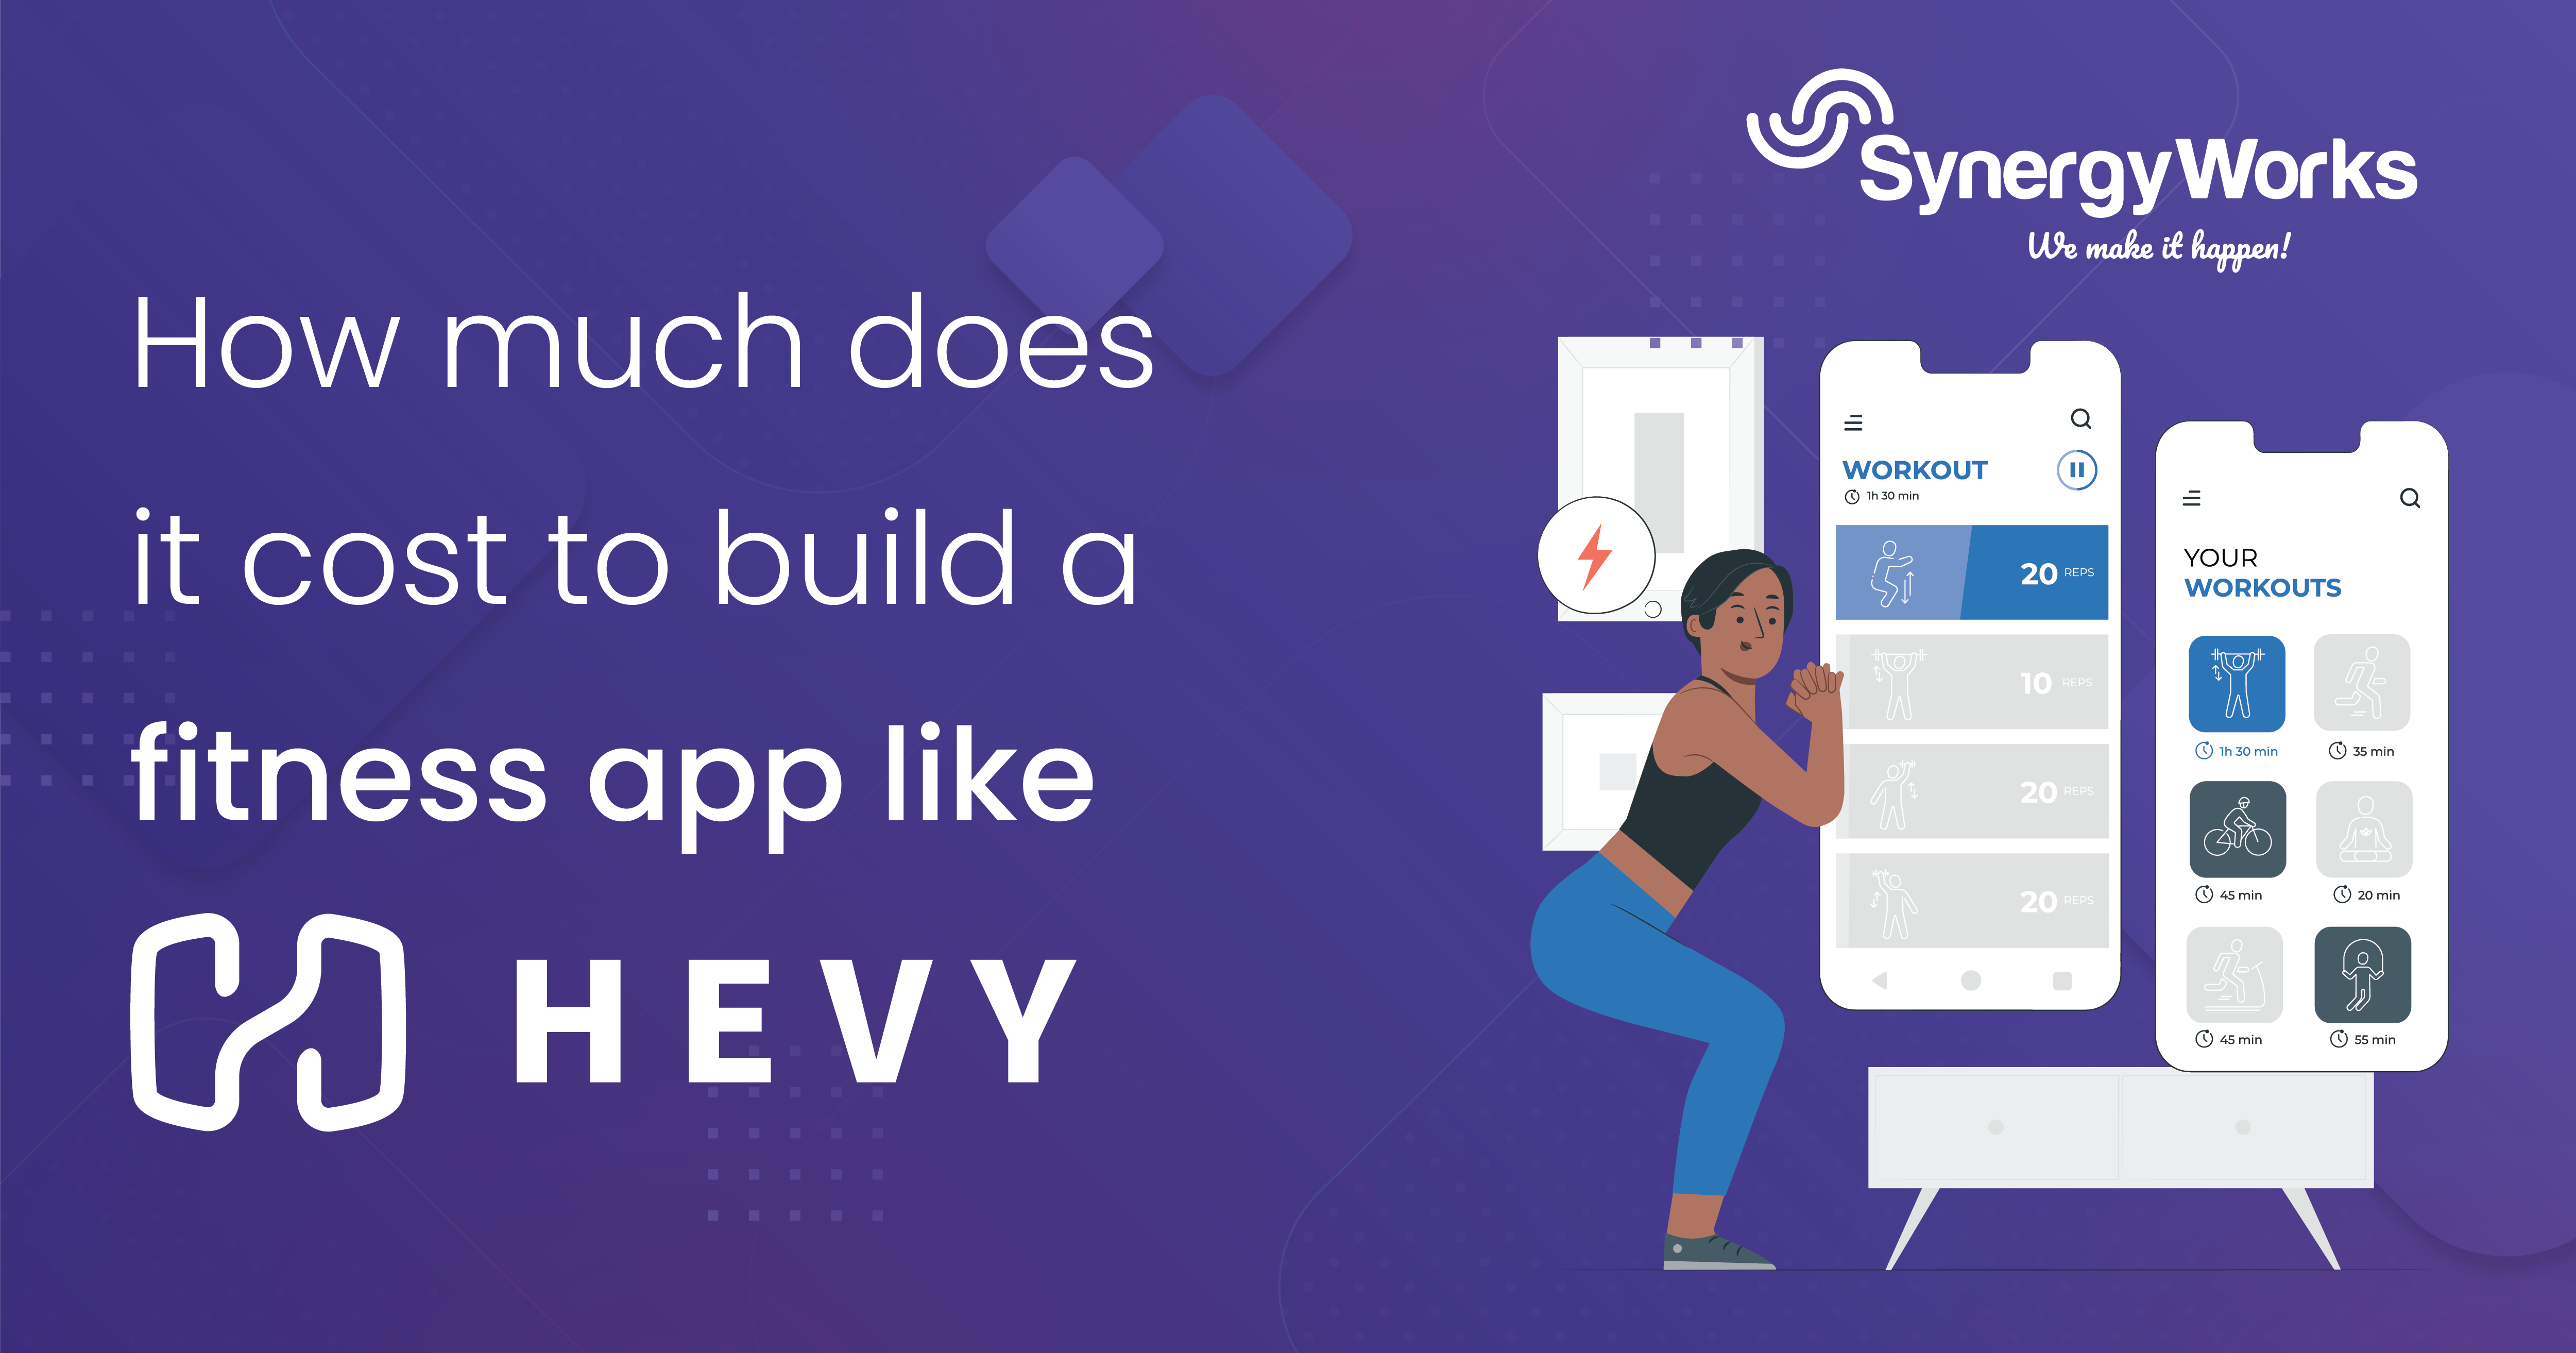 How Much Does It Cost to Build a Fitness App Like Hevy?